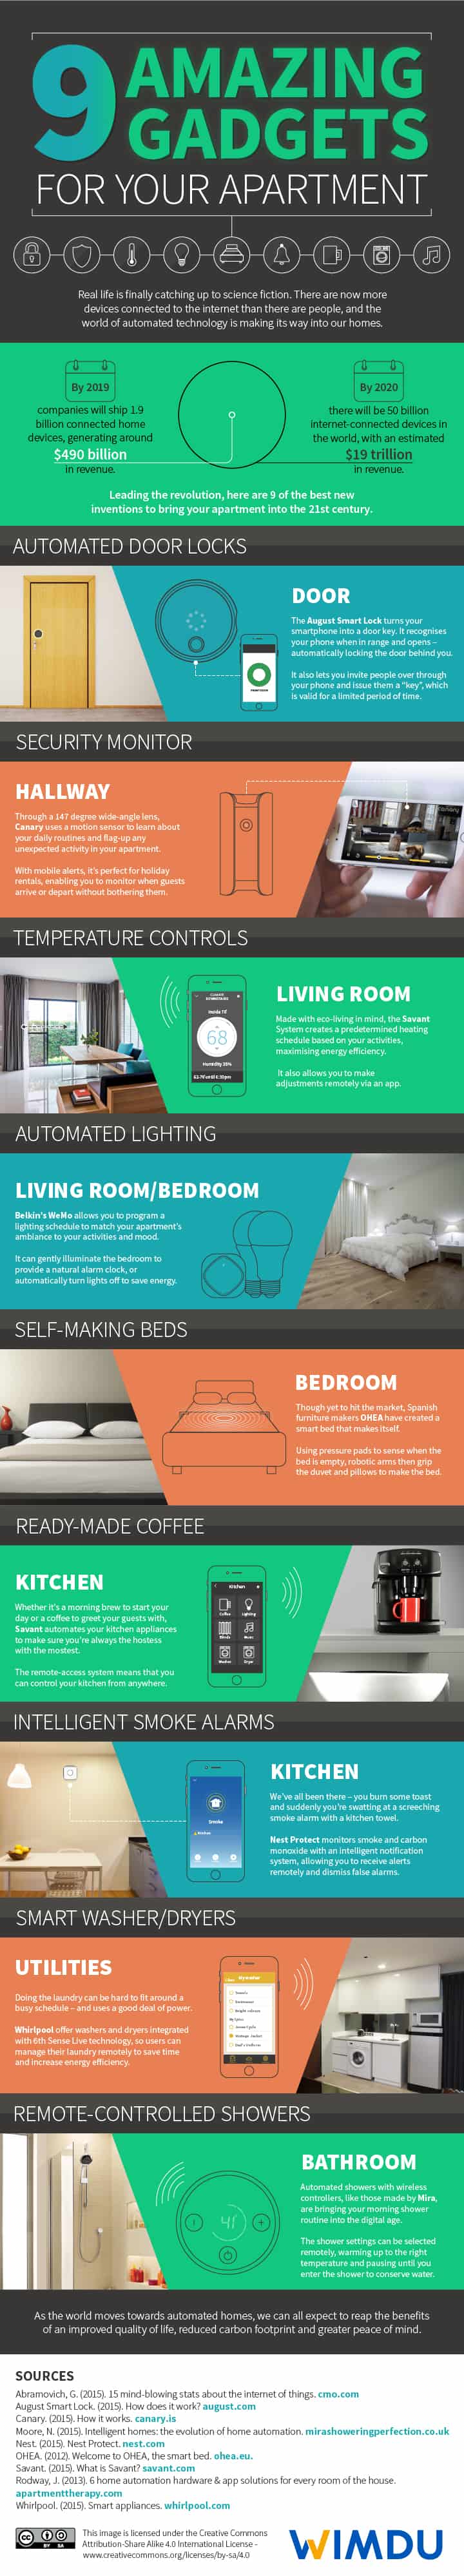 9 Amazing Gadgets for Your Apartment